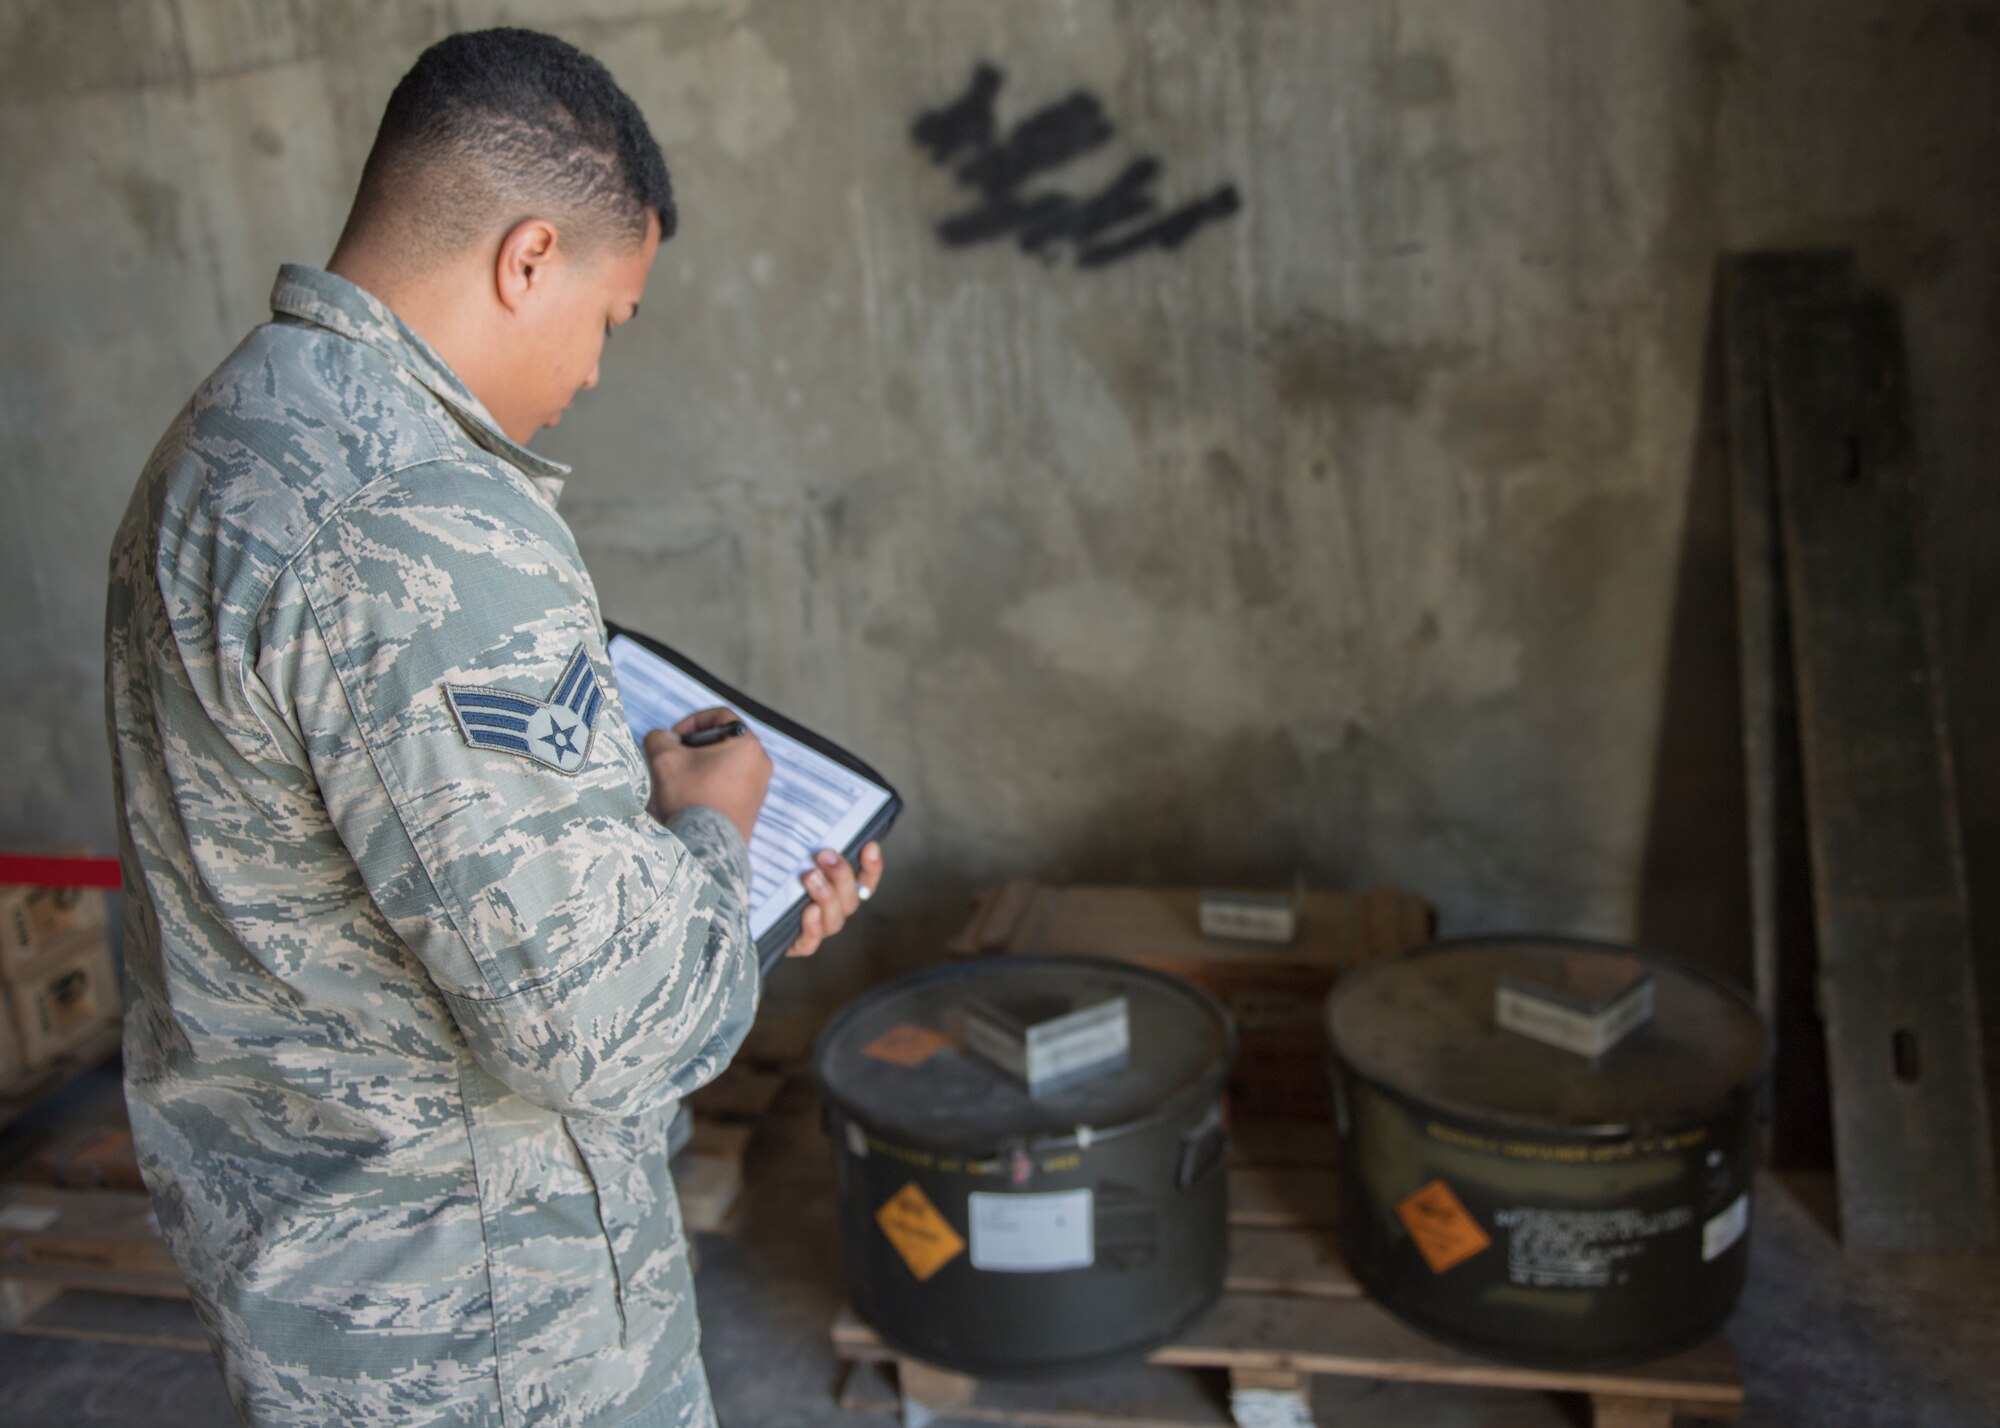 U.S. Air Force Senior Airman Winston Hendrick, 39th Maintenance Squadron munitions inspector, conducts inventory for munitions Jan. 23, 2019, at Incirlik Air Base, Turkey.